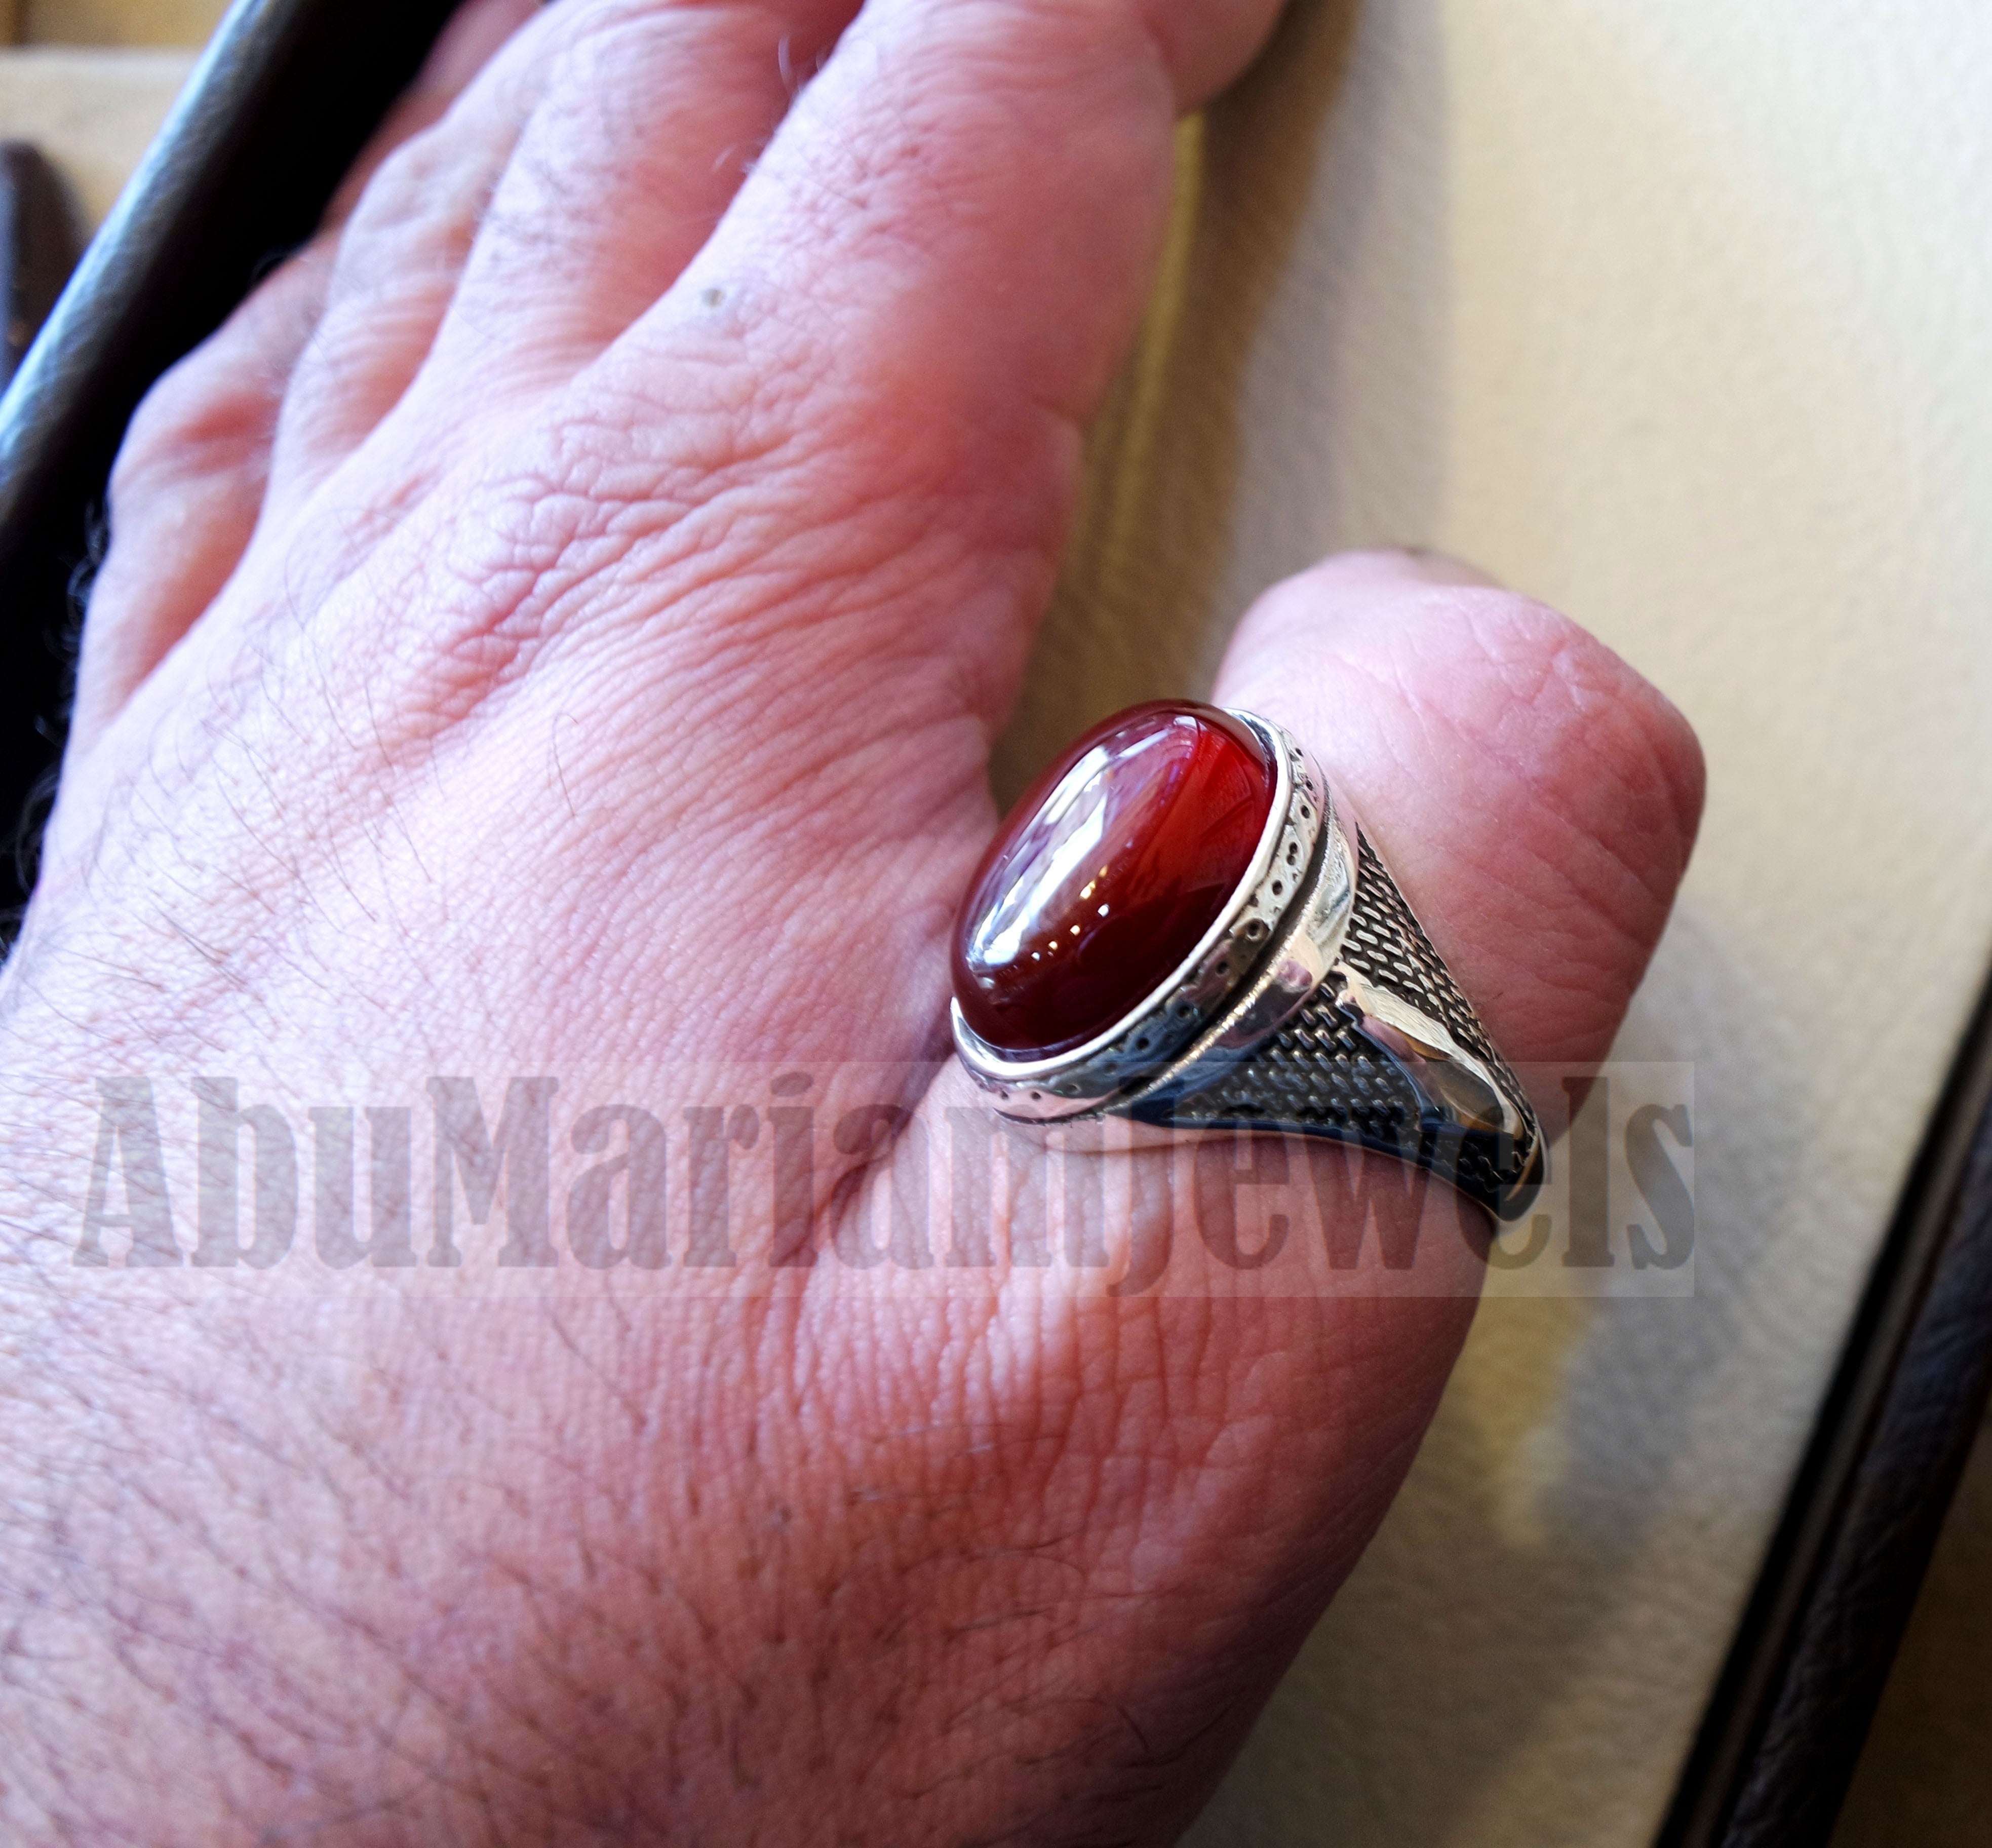 Palestine map men ring red natural agate aqeeq carnelian stone sterling silver 925 all sizes middle eastern ottoman style fast shipping خاتم فلسطين